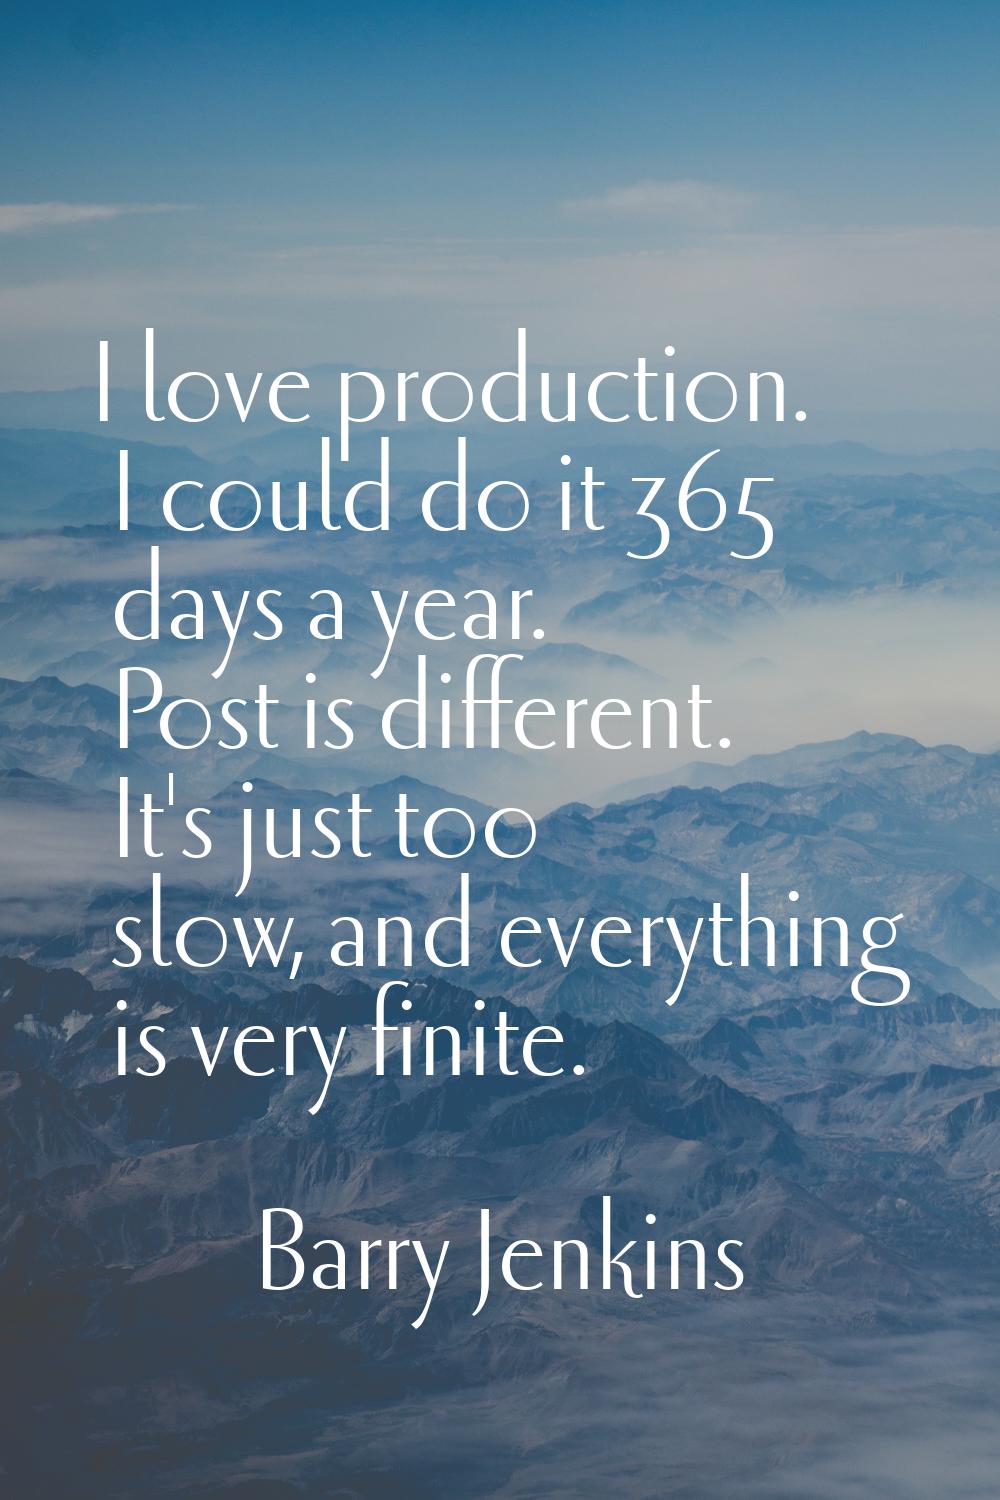 I love production. I could do it 365 days a year. Post is different. It's just too slow, and everyt